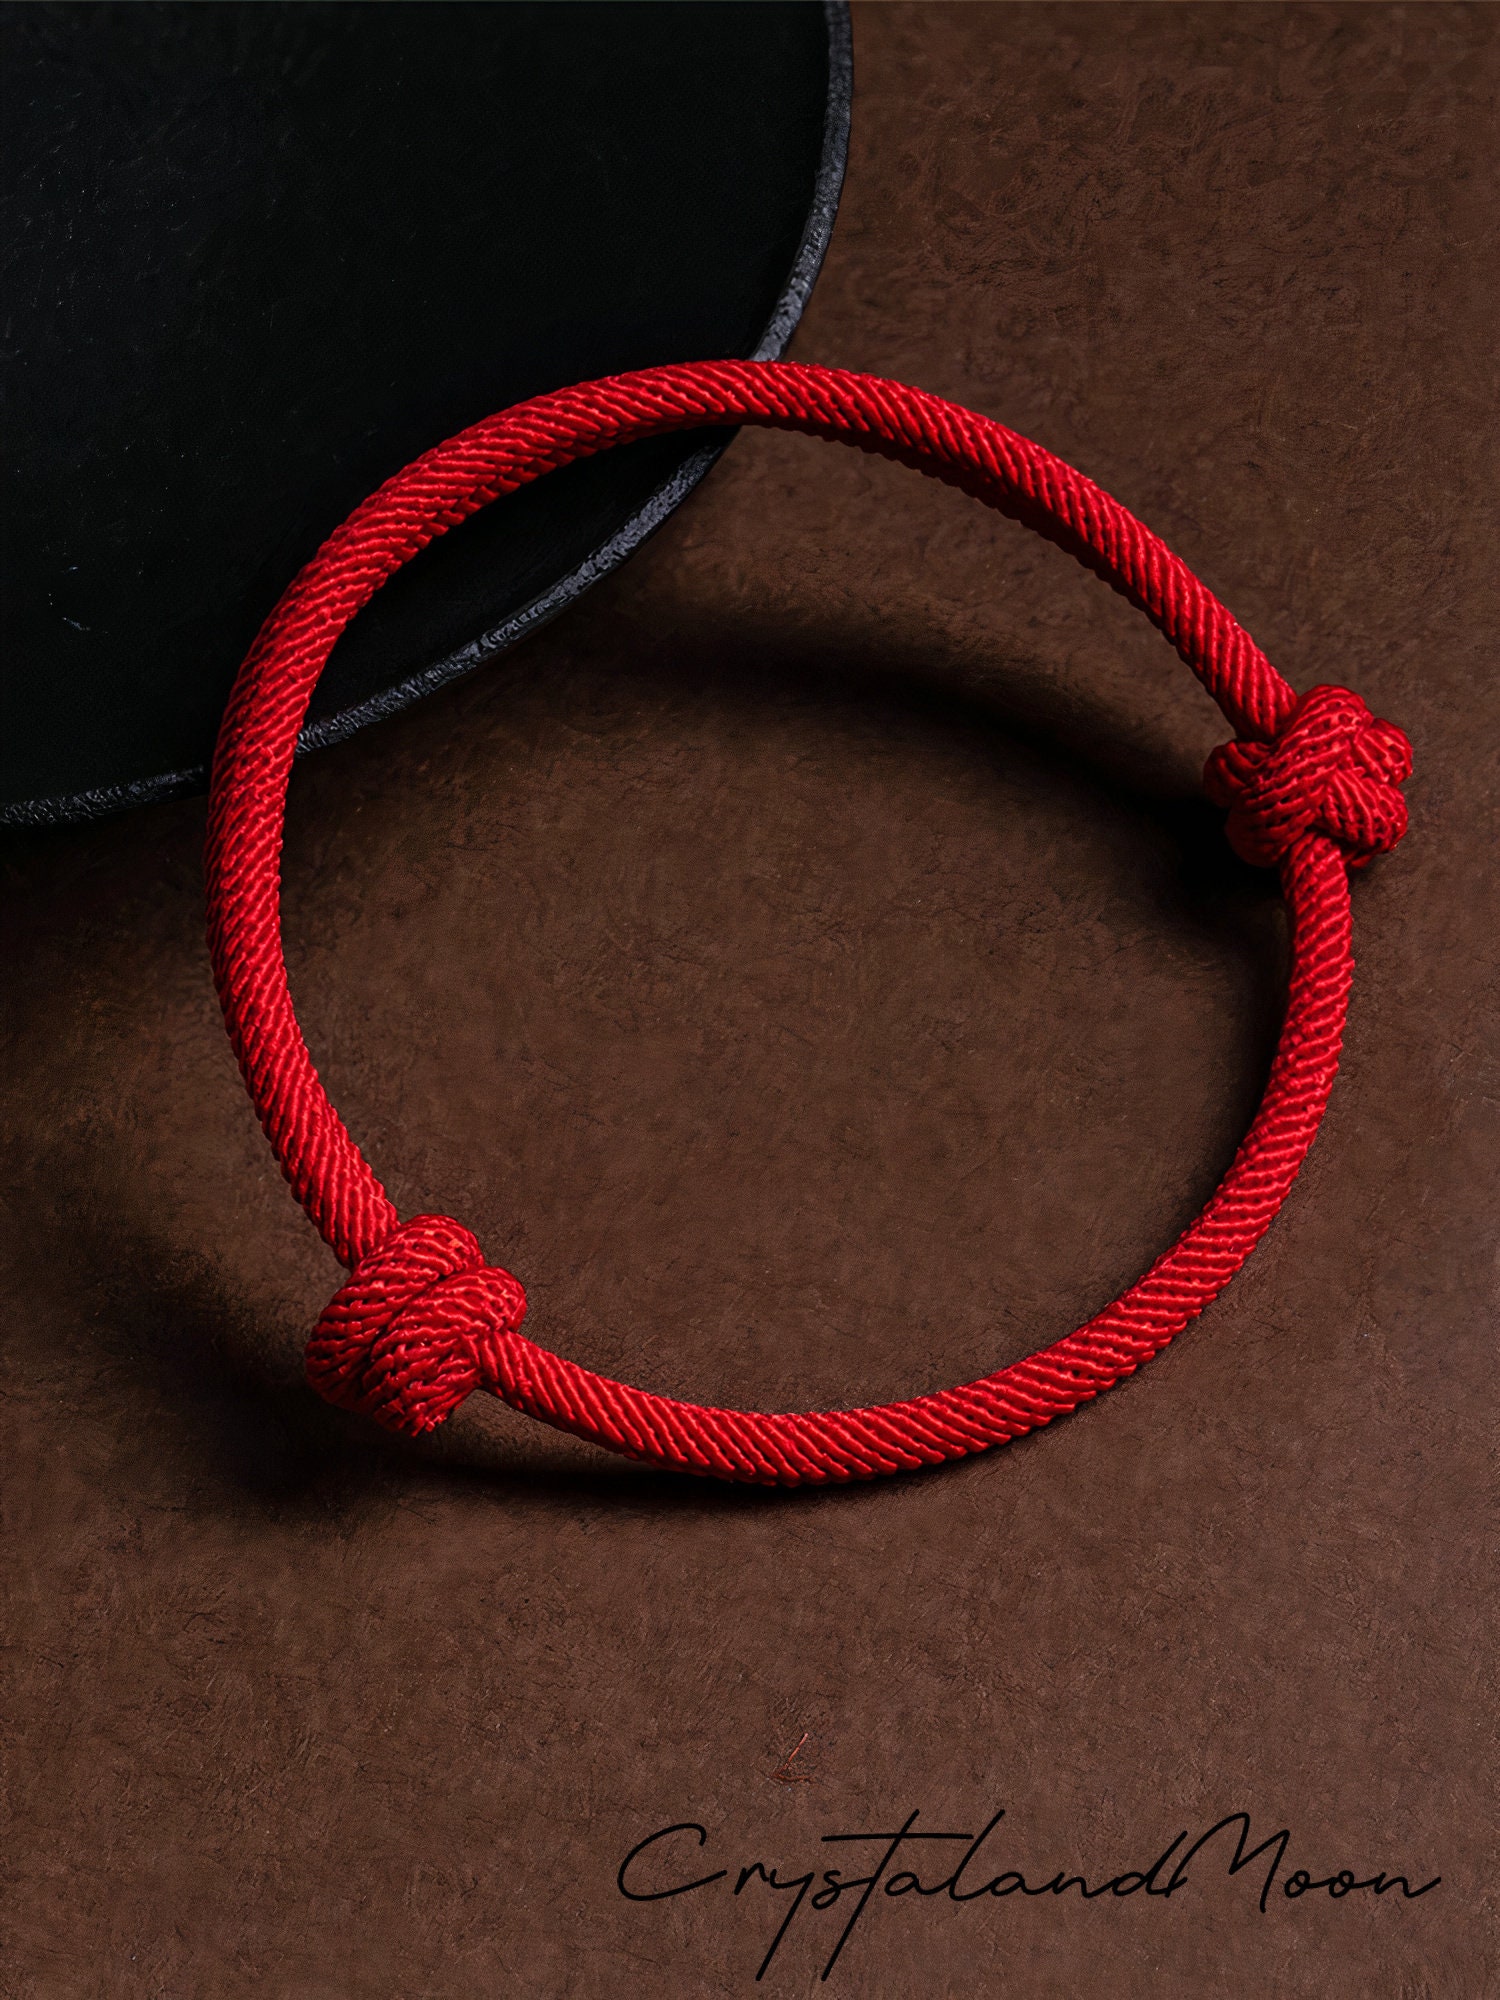 ioieia Authentic Blessed Tibetan monks Handmade Dorje Knot protection  bracelet for women and men with a talisman.red bracelet-Red string  bracelet-mens